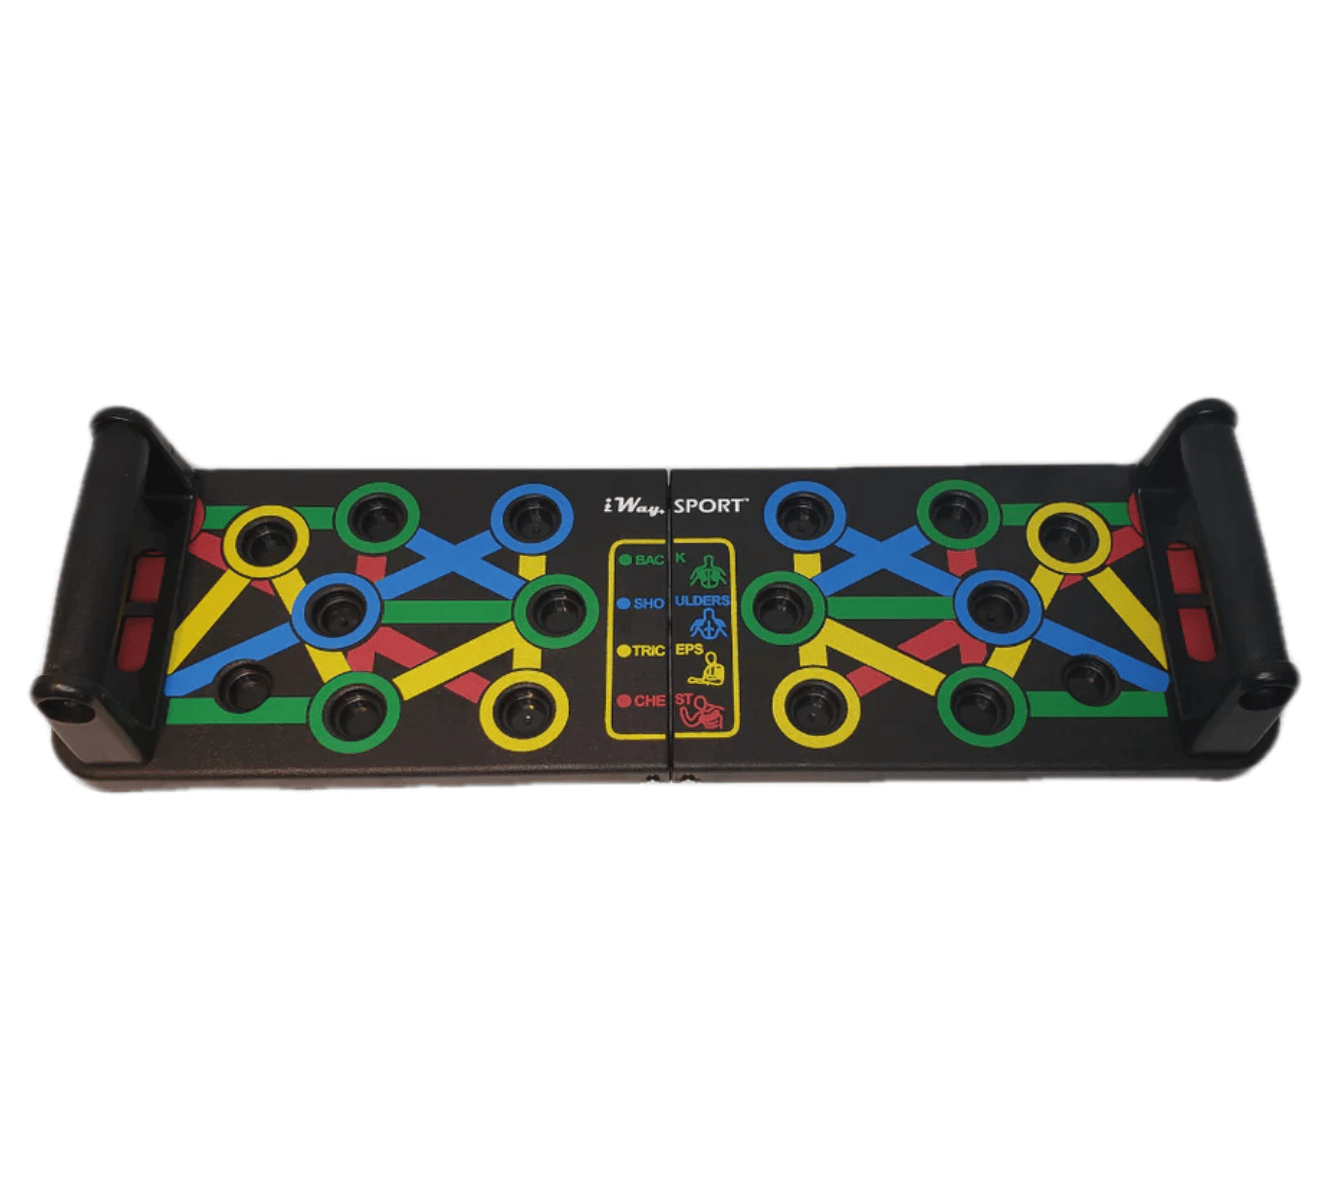 Power Up Exercise Board Review